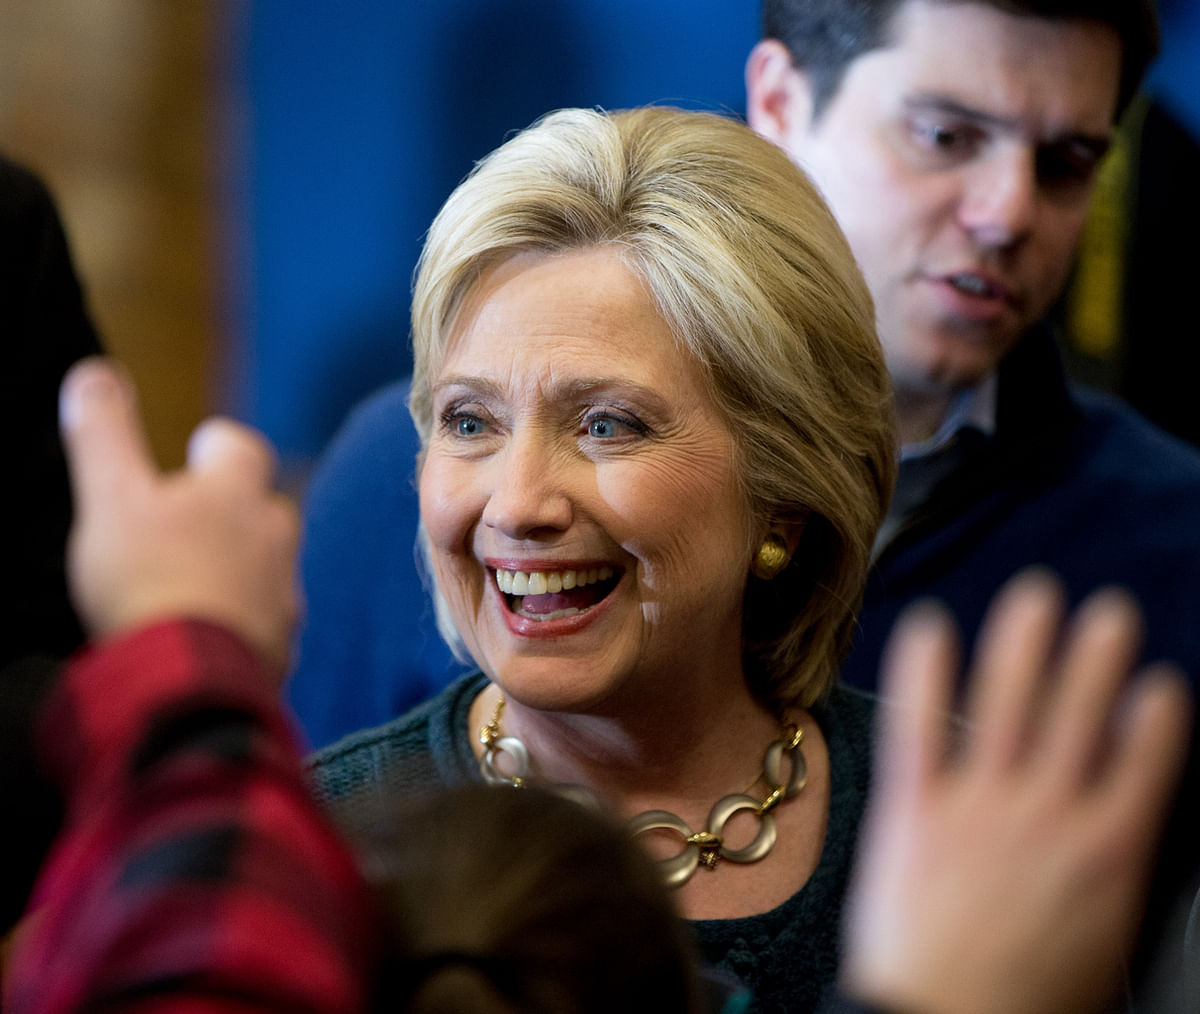 Hilary Clinton received a lukewarm welcome from Iowa, where she began her campaign in April last year. 